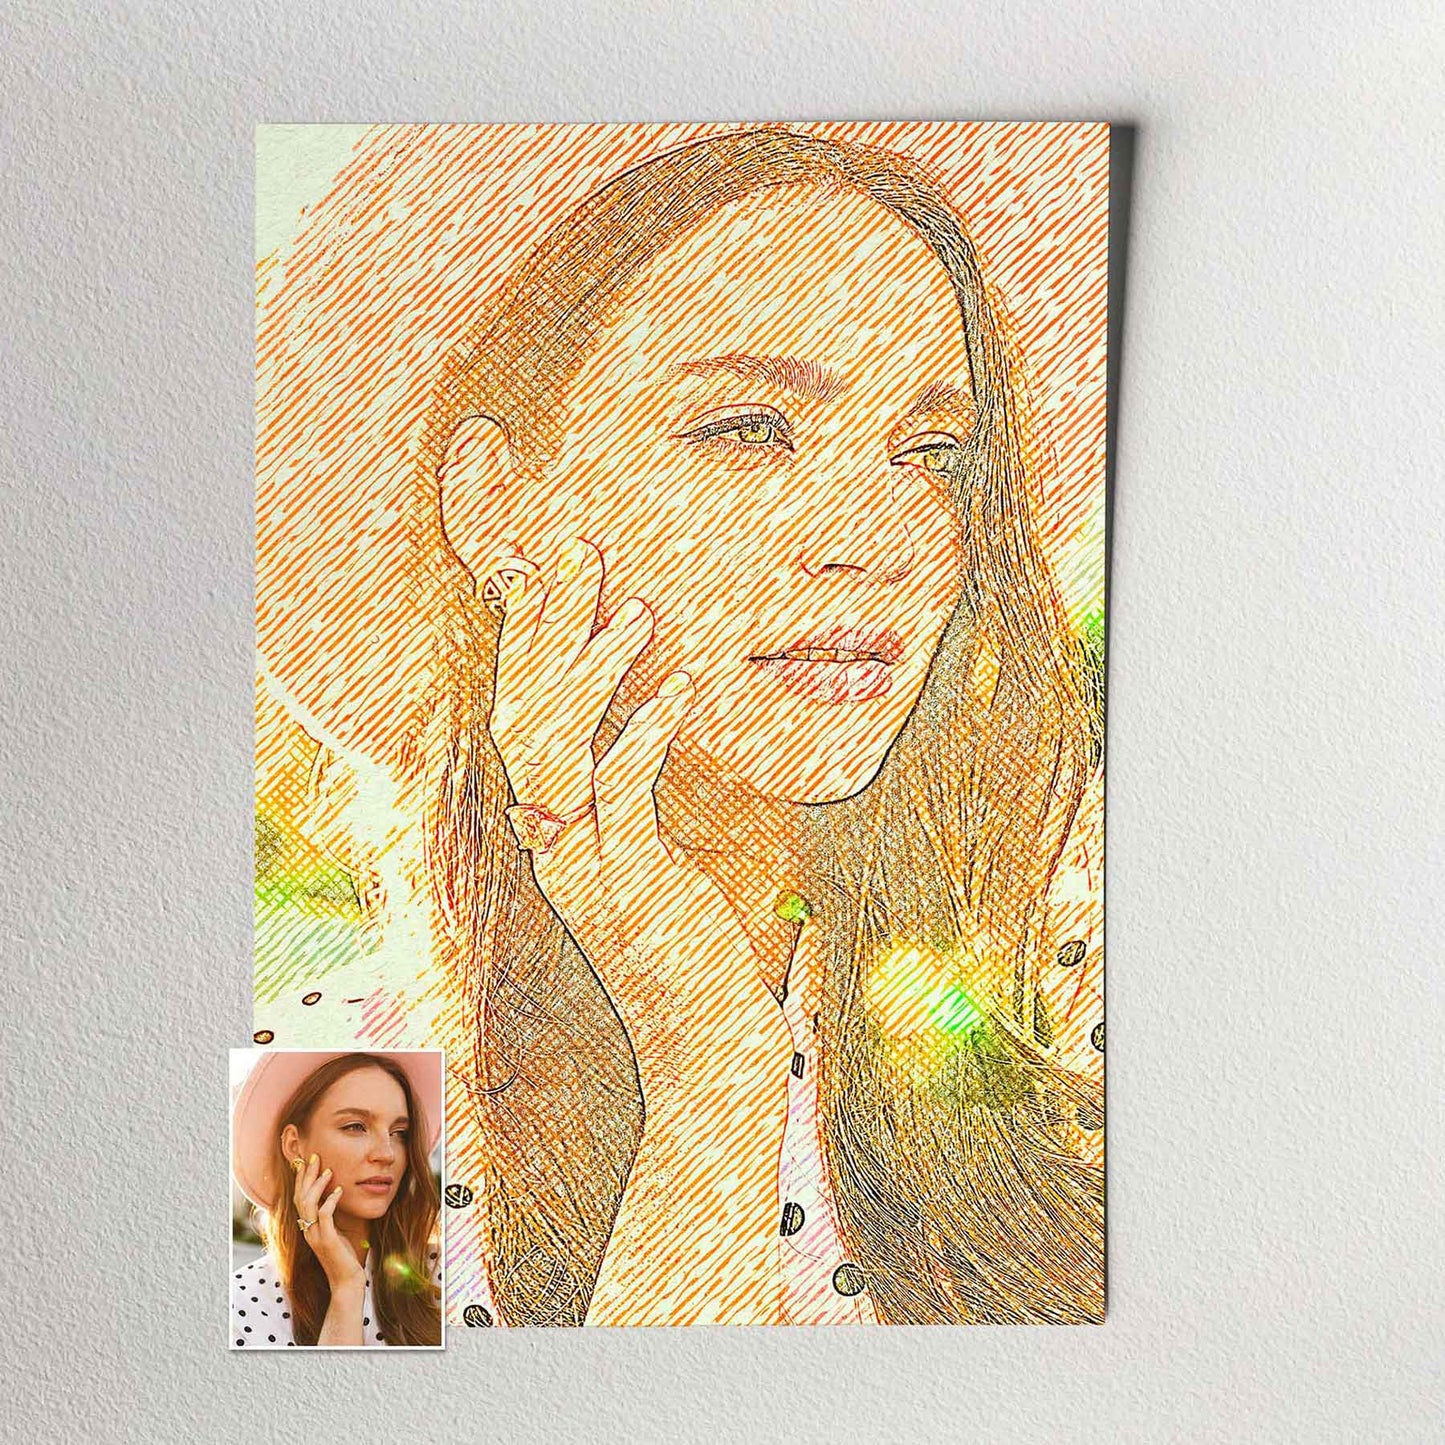 Immerse yourself in the world of art with the Personalised Drawing Crosshatch Print, transforming your photo into a masterpiece through a crosshatch filter. Its vivid and vibrant style captures the essence of modern elegance and chic